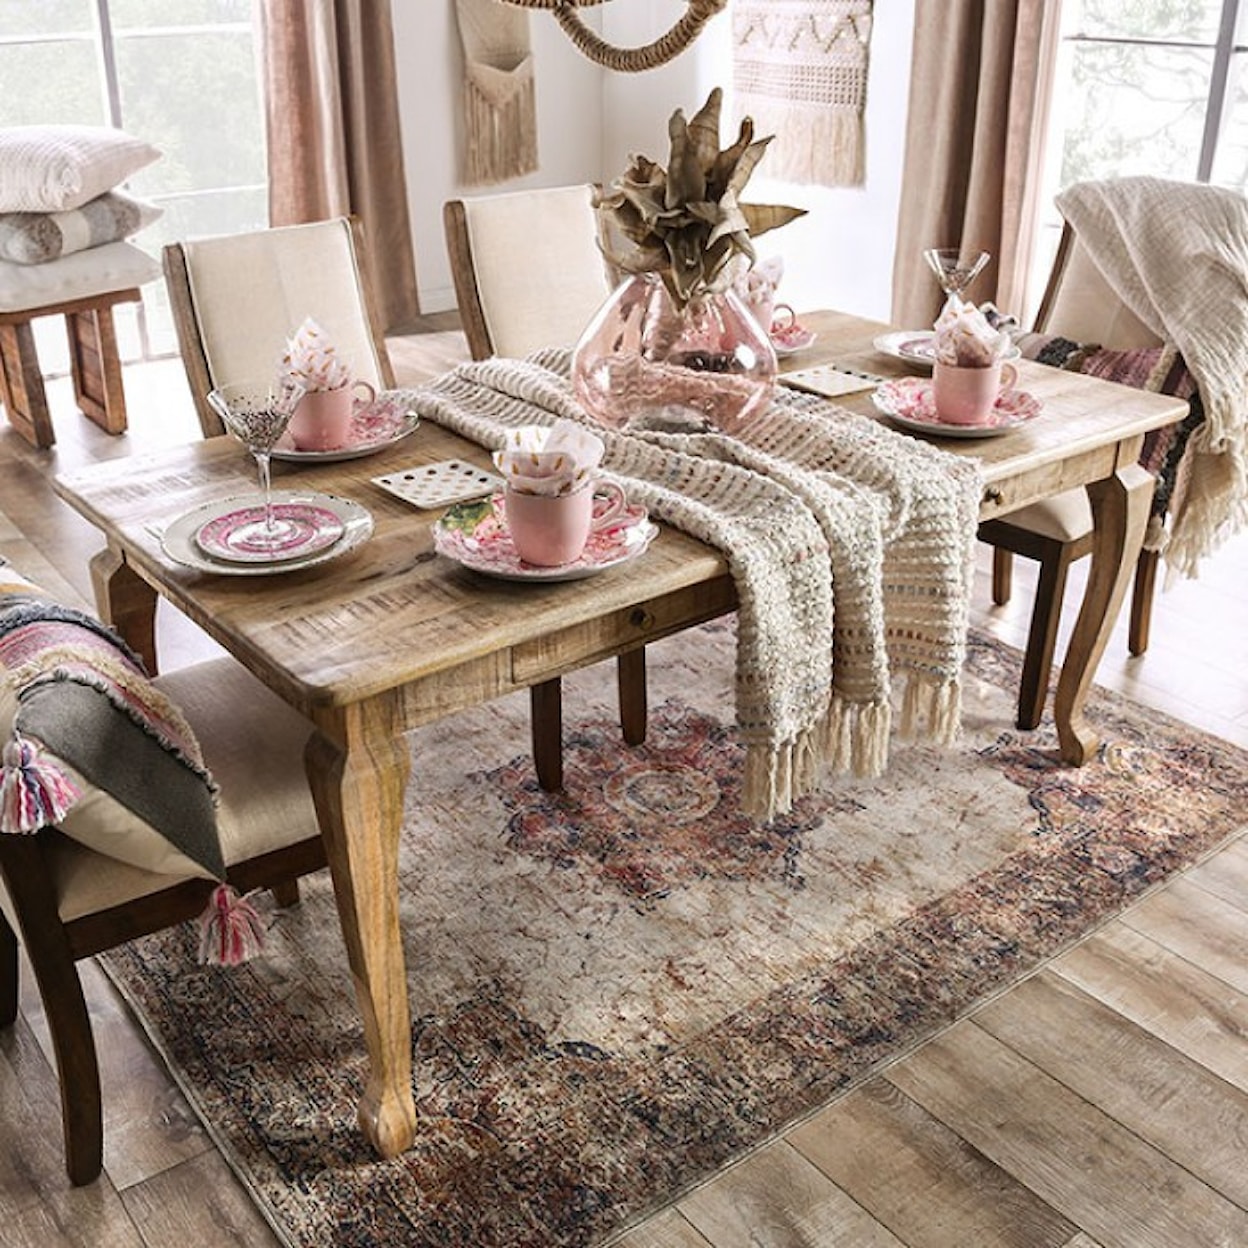 Furniture of America Blanchefleur Dining Table